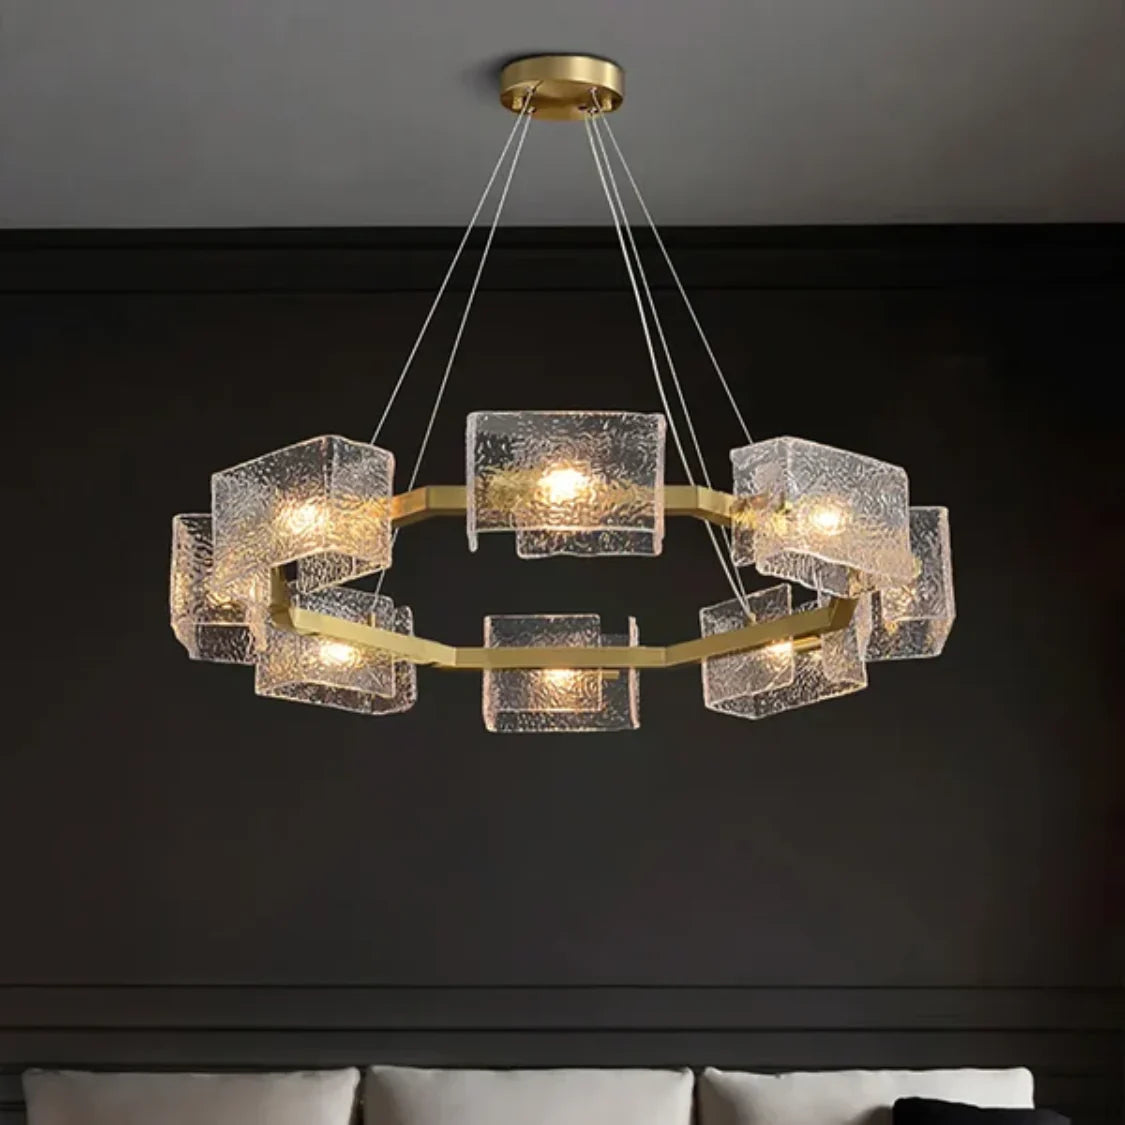 Illuminating Spaces - When to Use a Sputnik Chandelier?